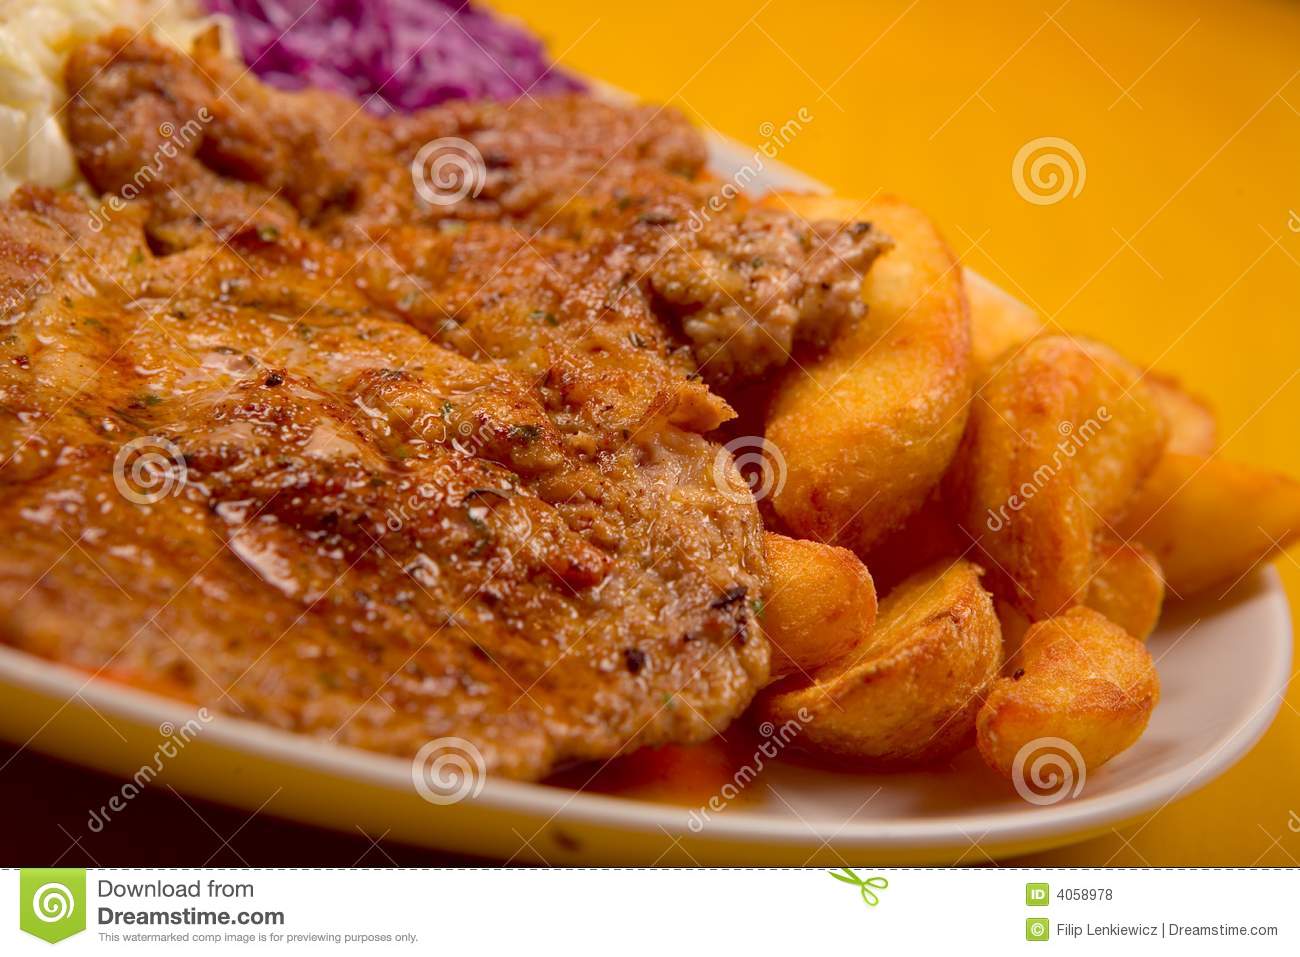 Grilled Steak And Potatoes With Red Cabbage On White Plate On Yellow    